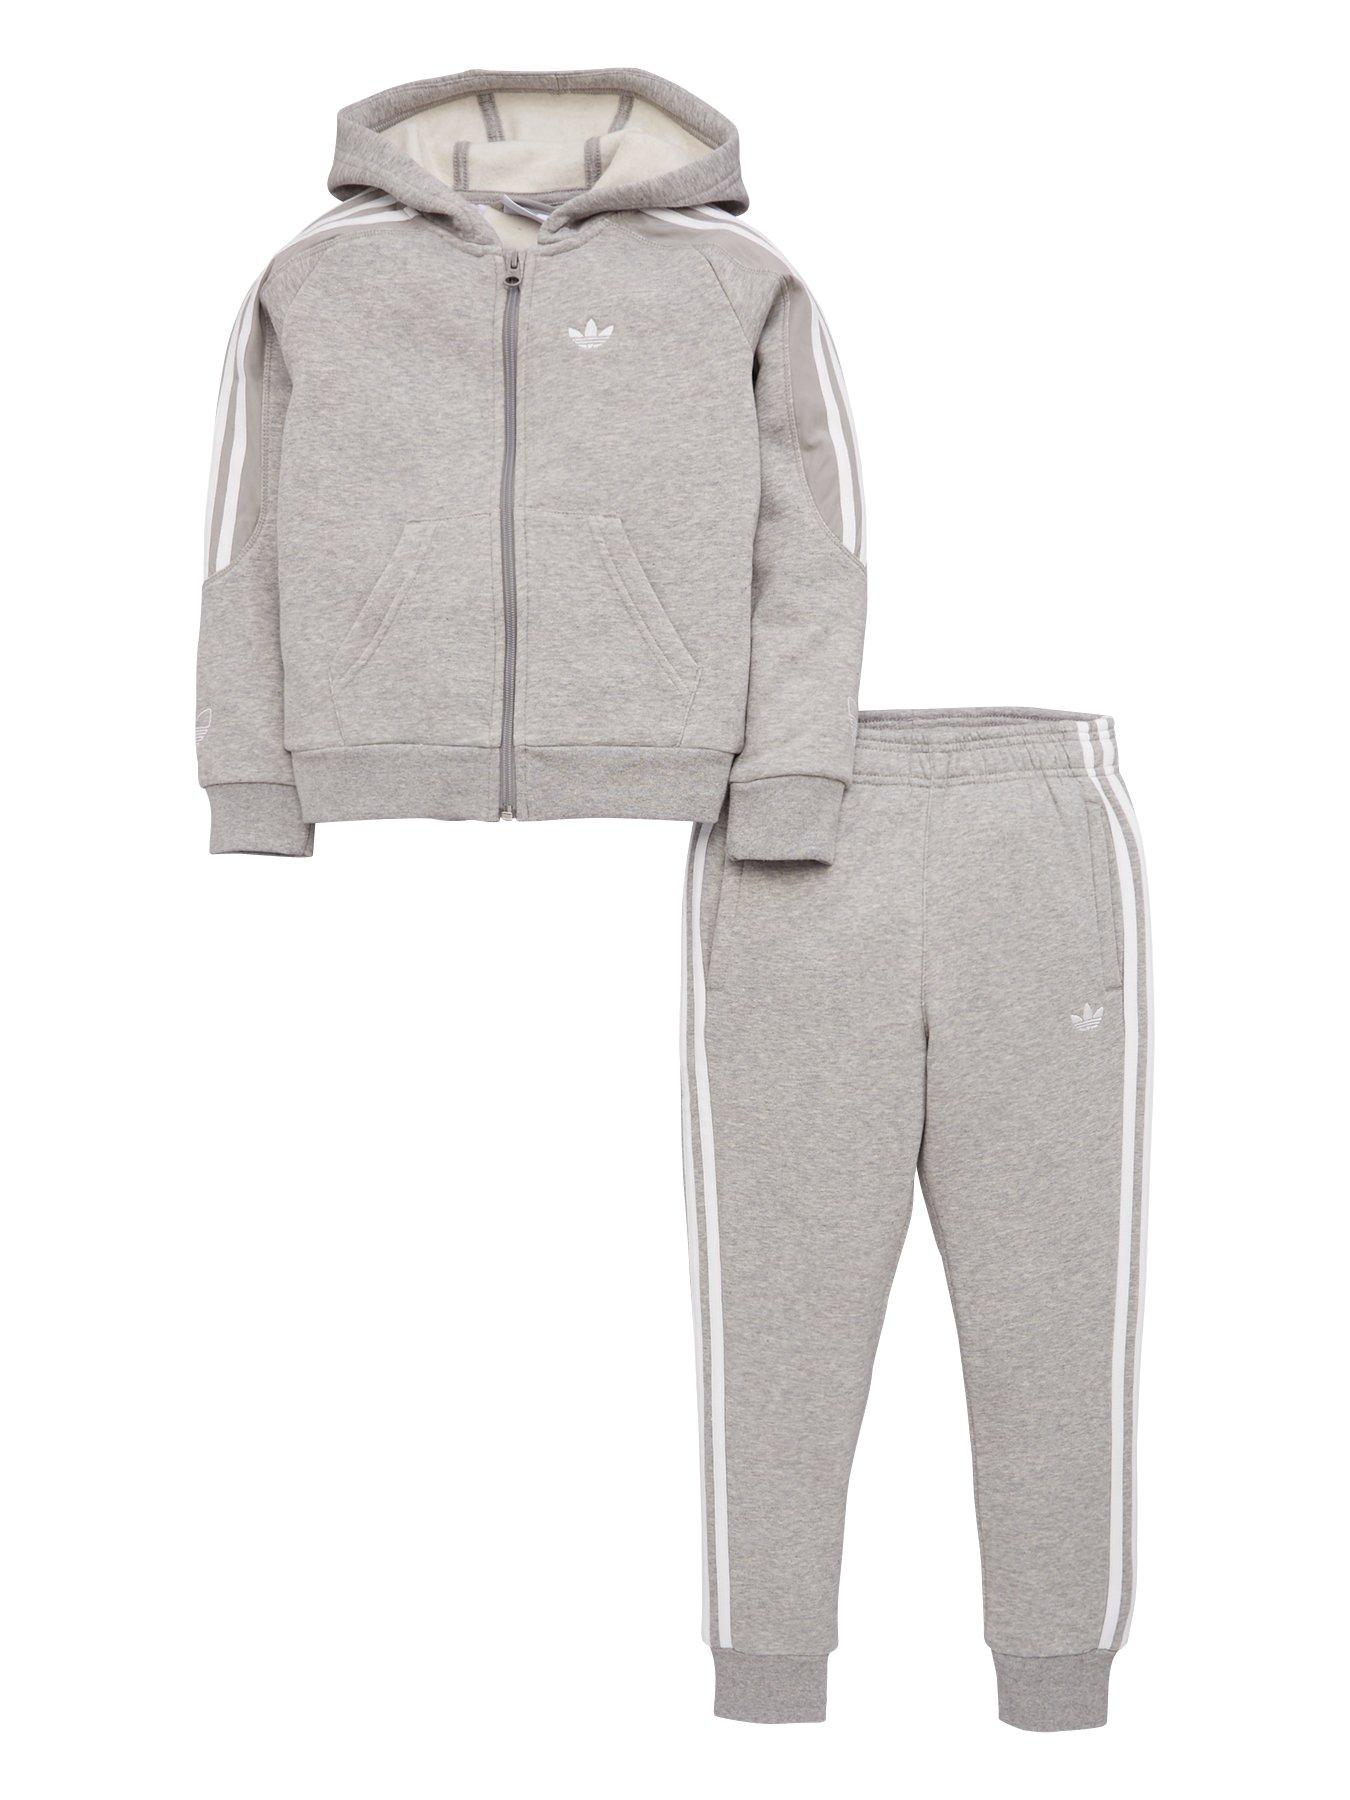 adidas grey and white tracksuit